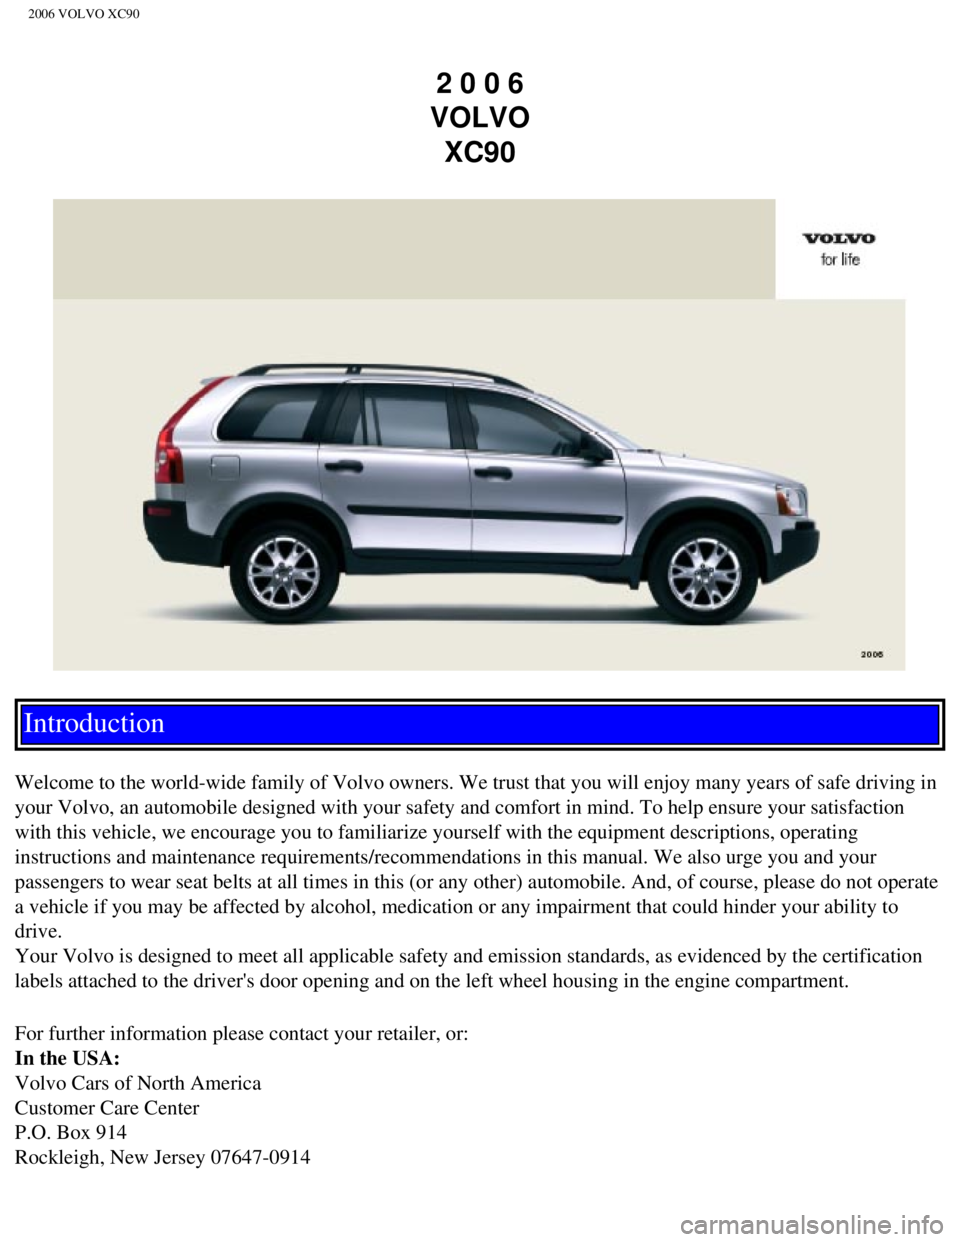 VOLVO XC90 2006  Owners Manual 
2006 VOLVO XC90
2 0 0 6  
VOLVO  XC90
Introduction 
 
Welcome to the world-wide family of Volvo owners. We trust that you will\
 enjoy many years of safe driving in 
your Volvo, an automobile designe